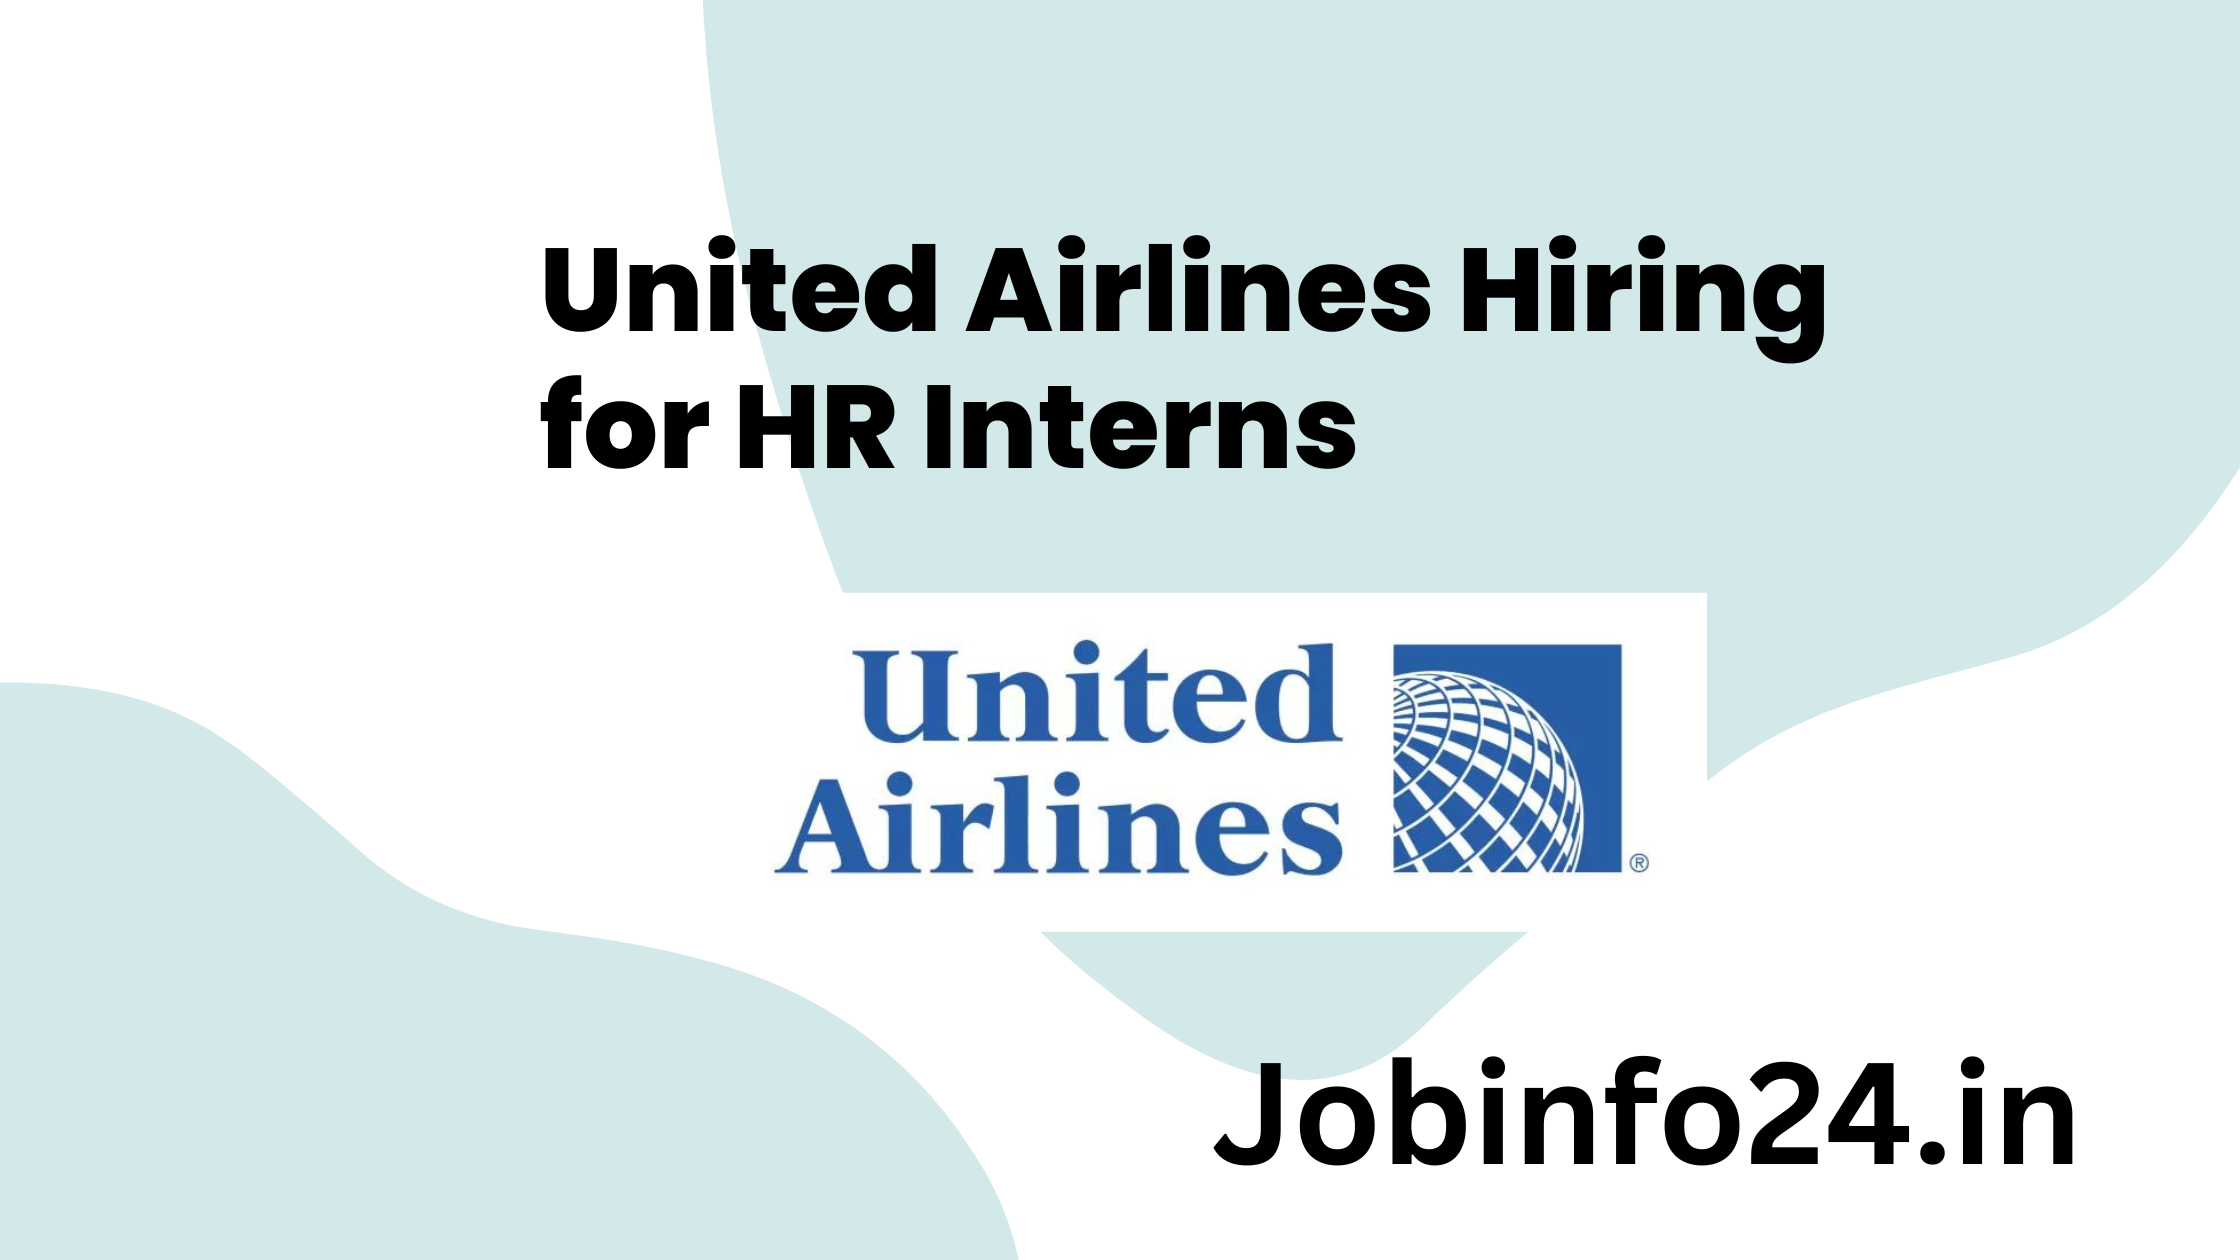 United Airlines Hiring for HR Interns